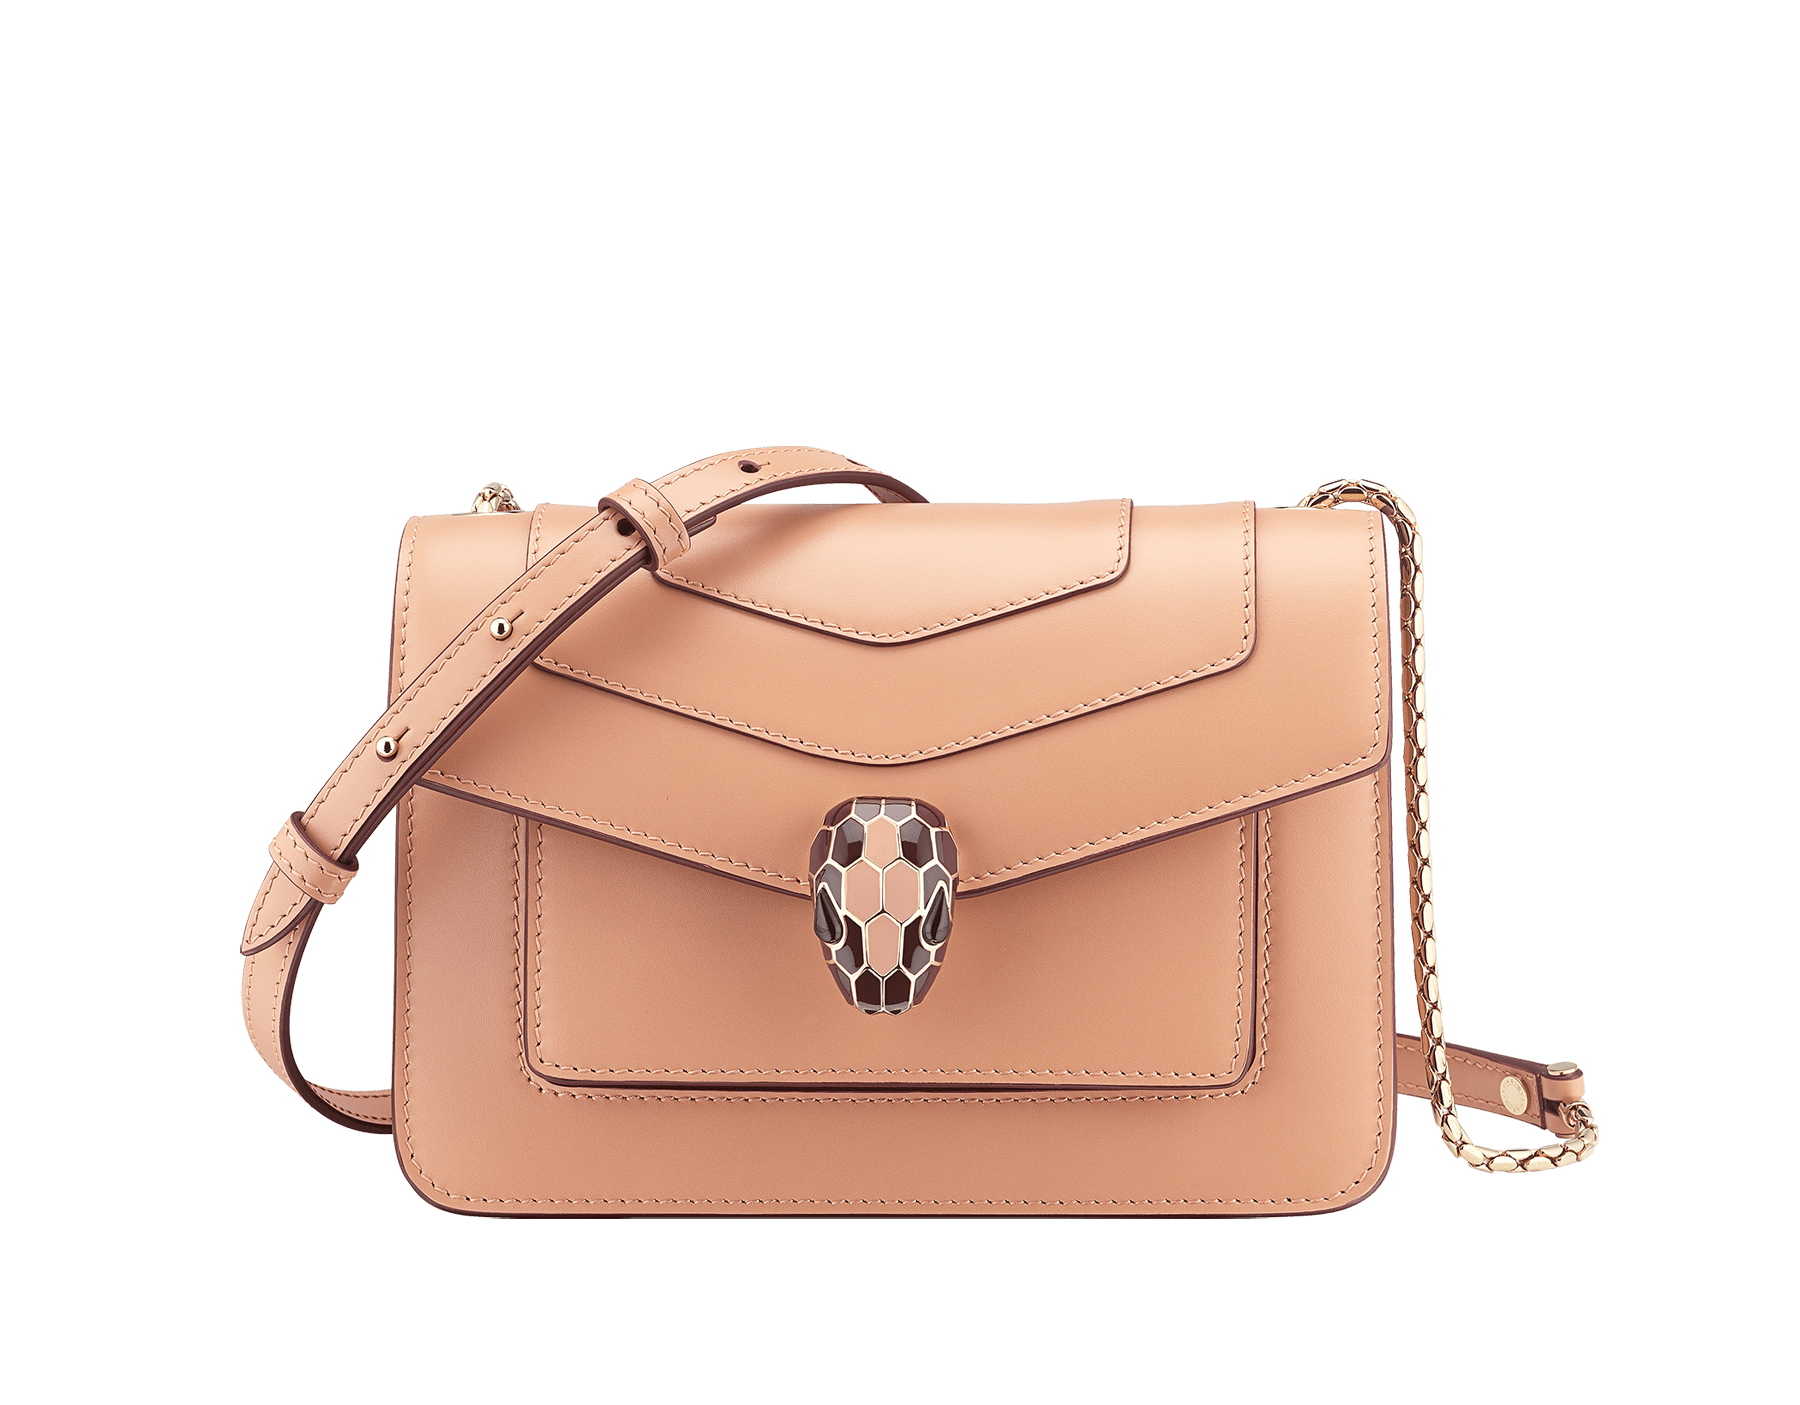 Serpenti Forever small crossbody bag in black calf leather with emerald green grosgrain lining. Captivating snakehead closure in light gold-plated brass embellished with black and white agate enamel scales and green malachite eyes. 1082-CLc image 1